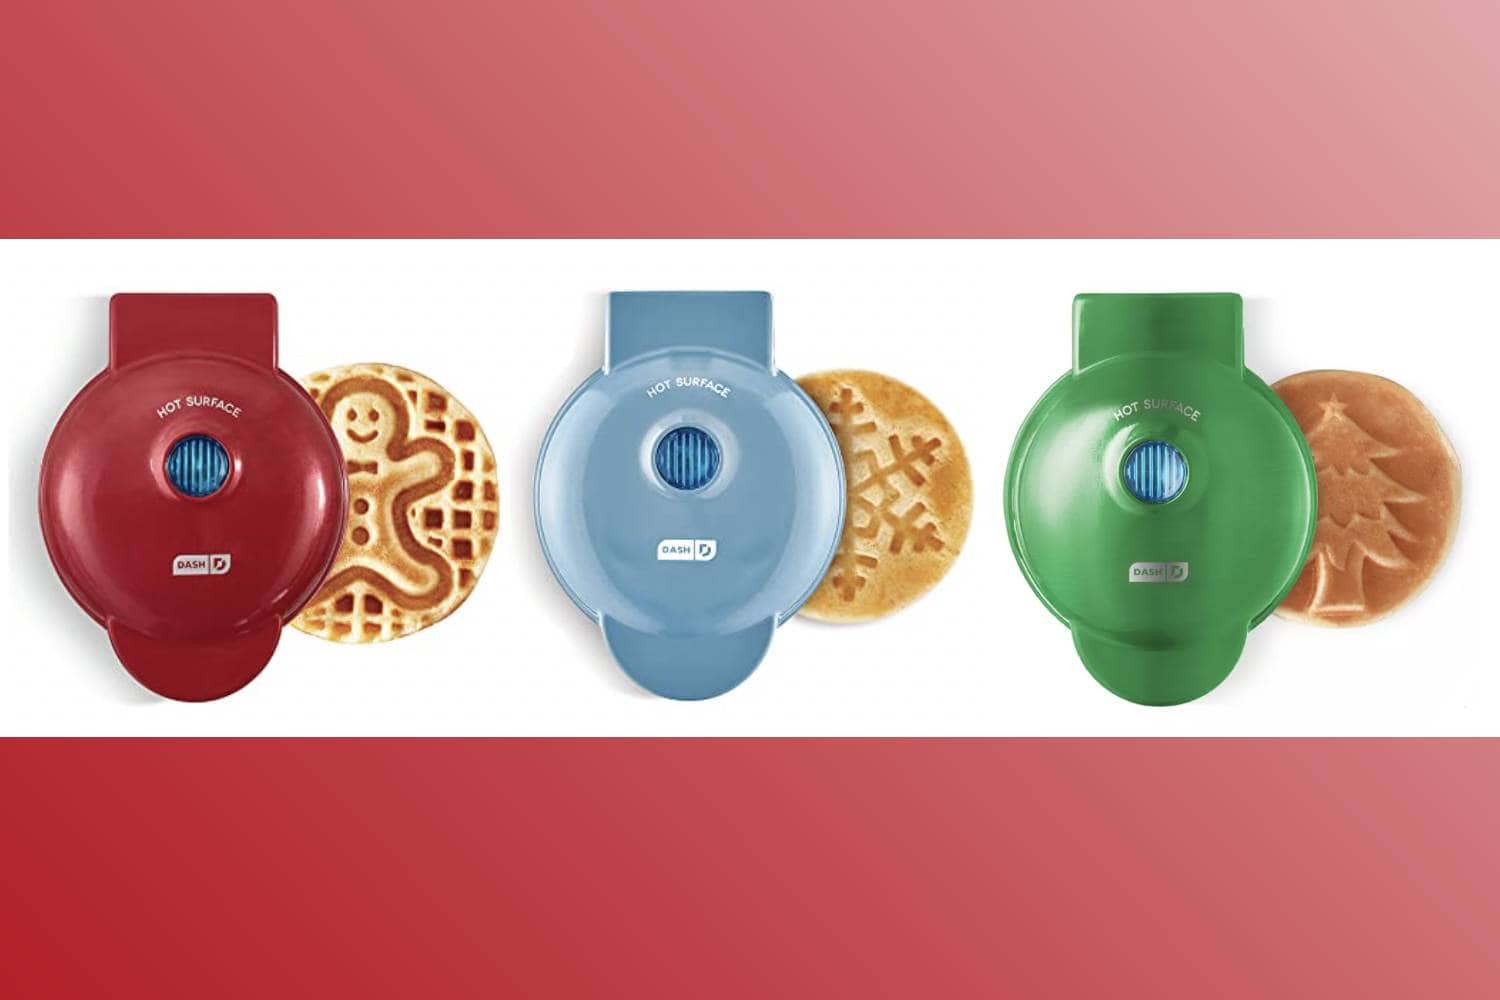 Dash Just Released 3 Mini Waffle Makers With Holiday Designs - Let's Eat  Cake